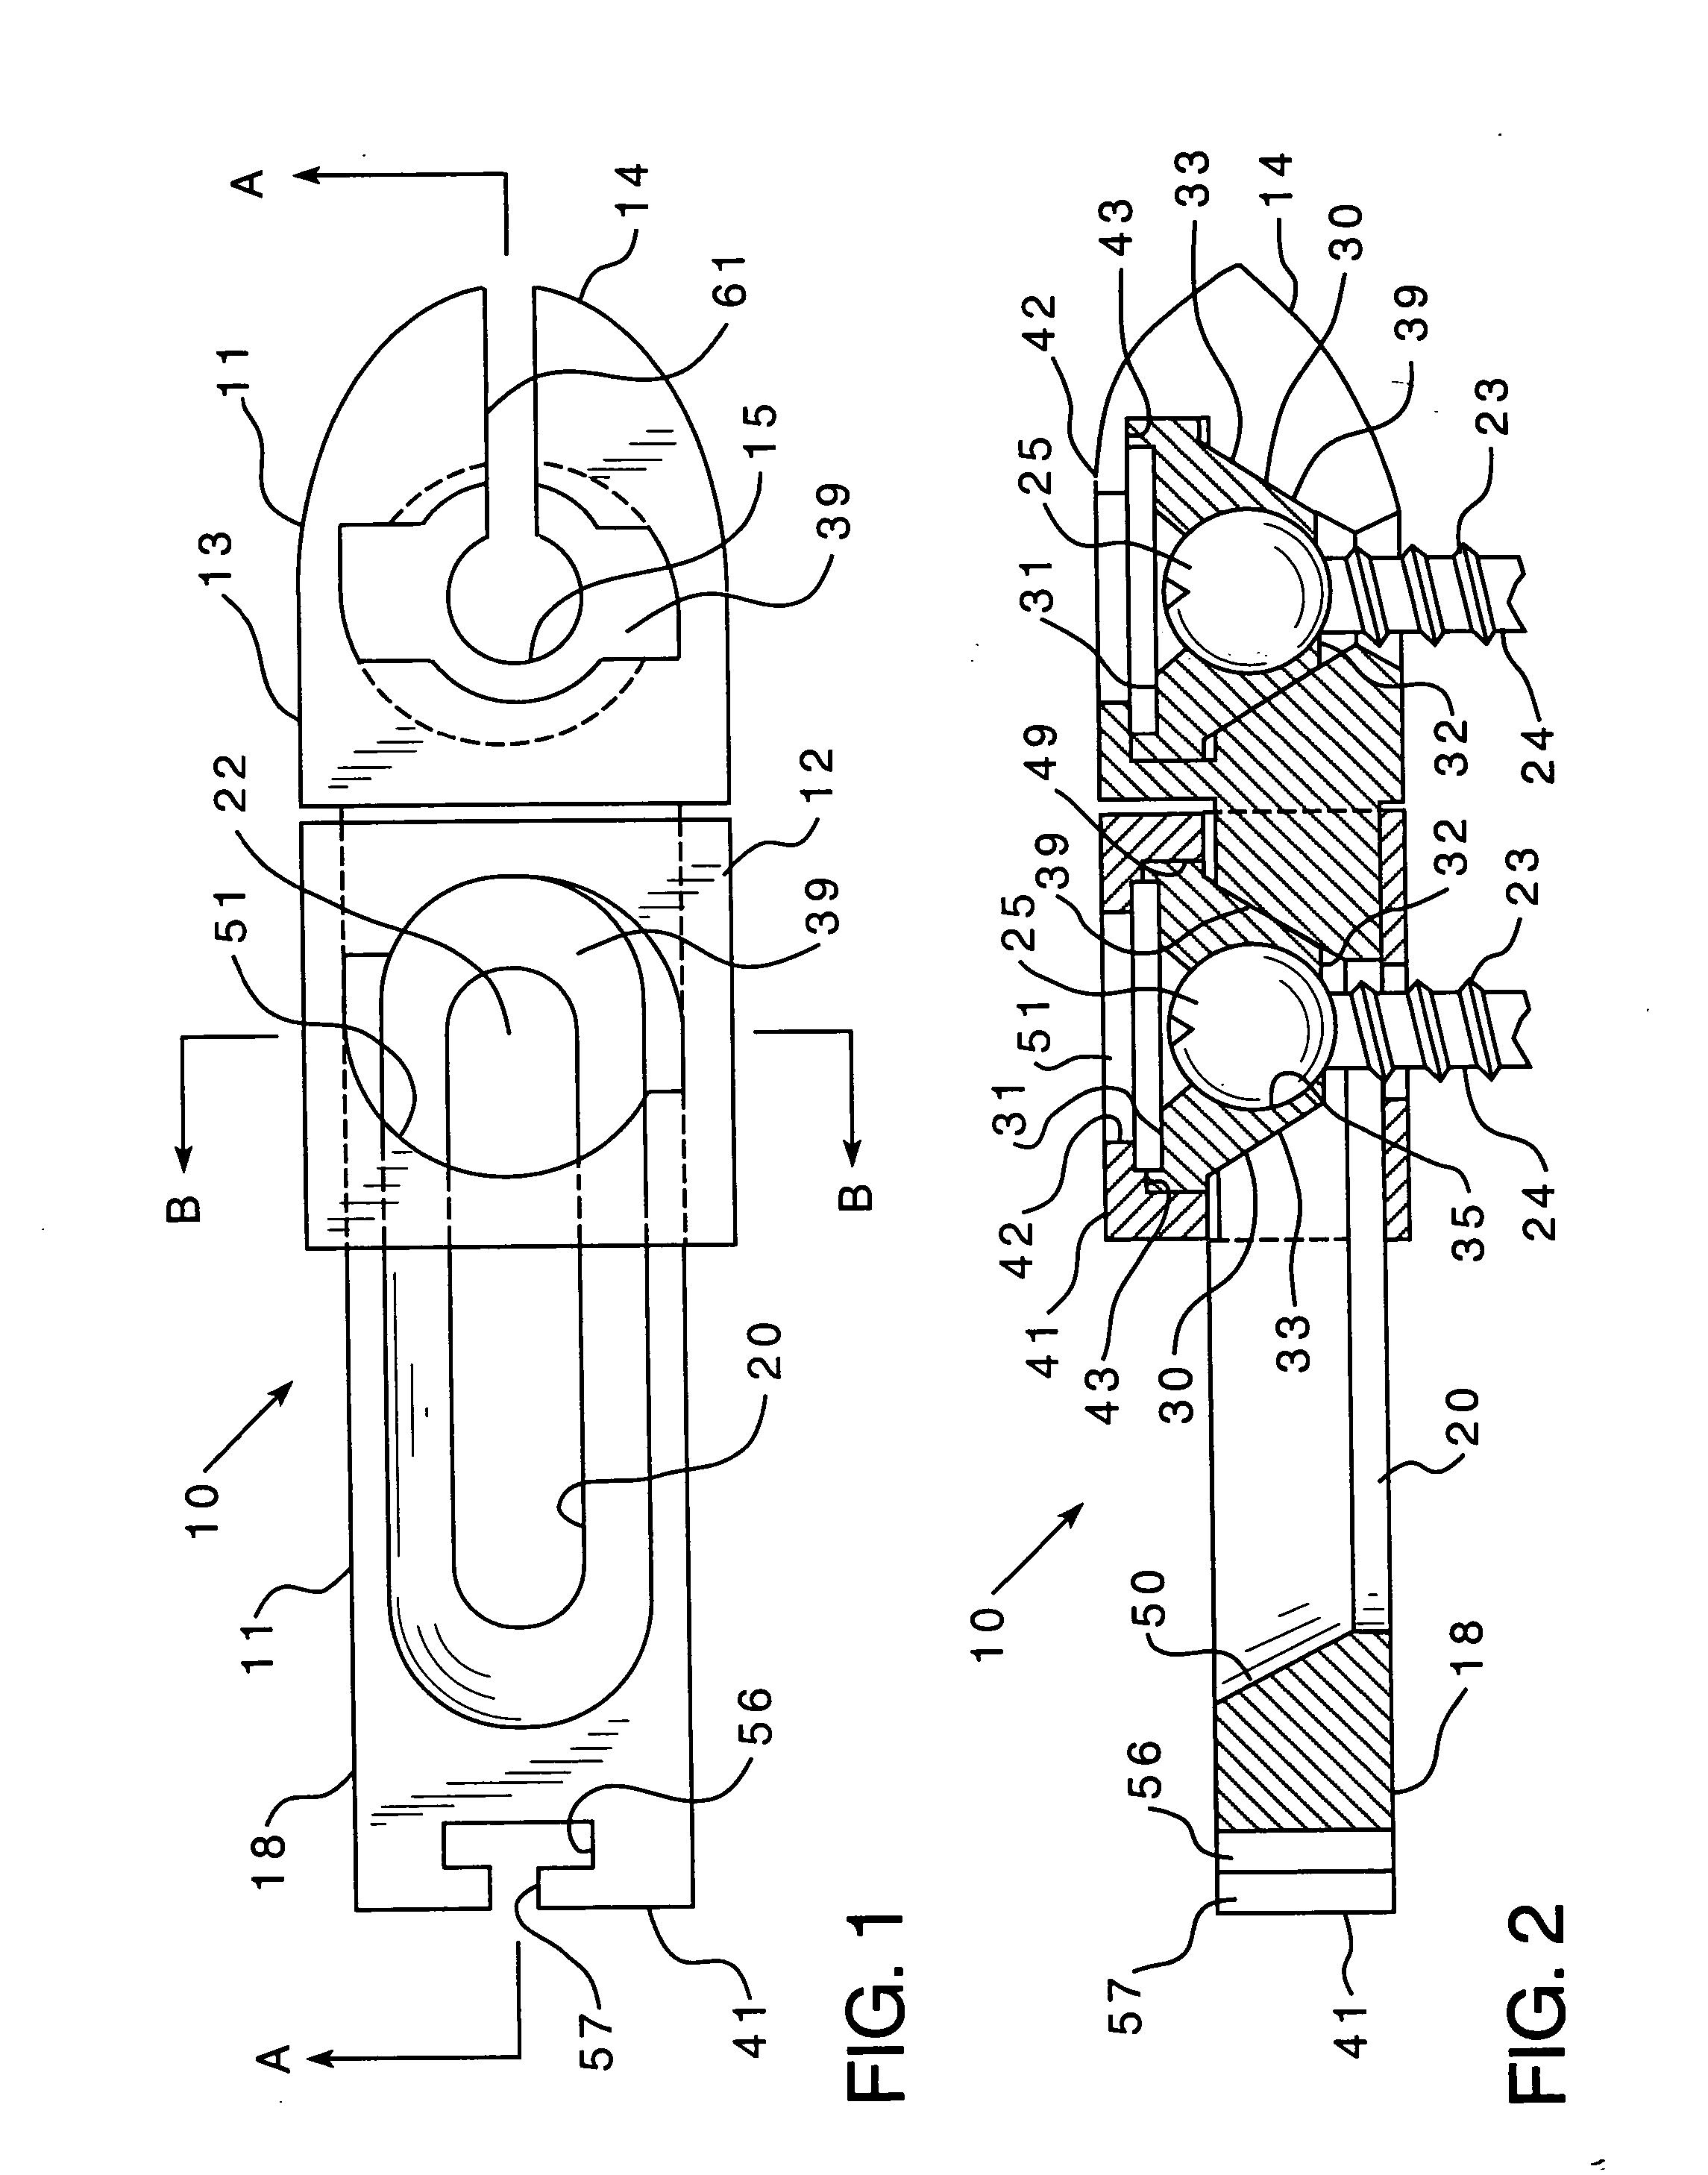 Bone fixation assembly and method of securement